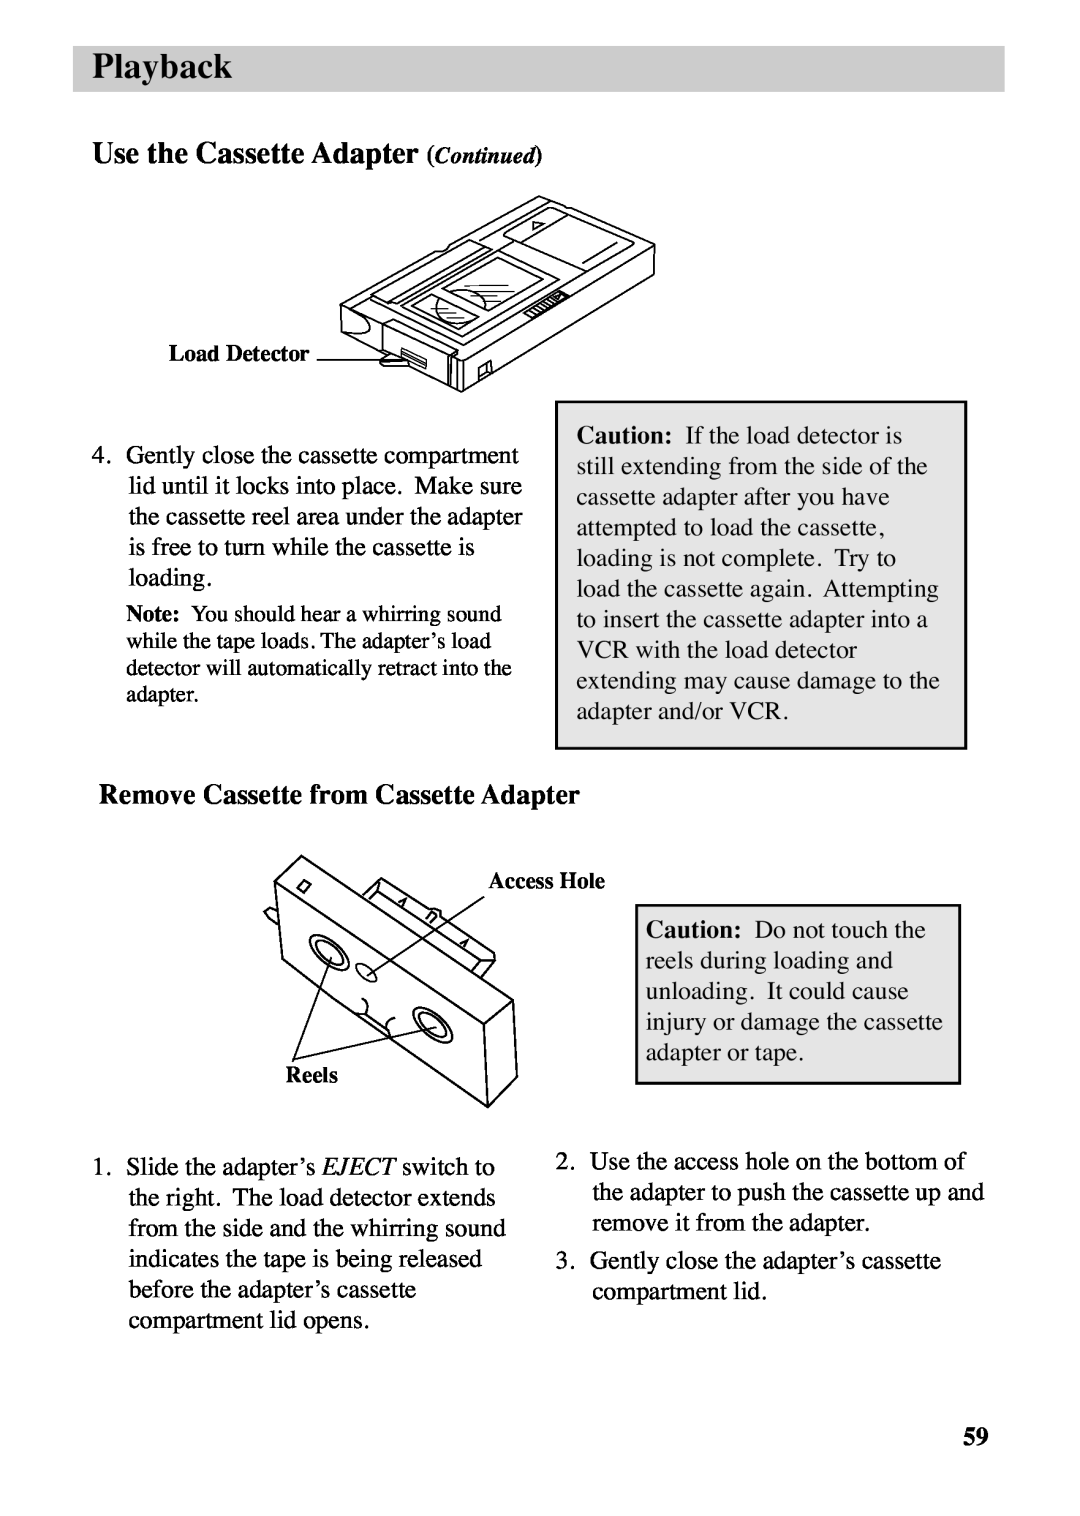 RCA CC6263 manual Use the Cassette Adapter Continued, Remove Cassette from Cassette Adapter, Playback 